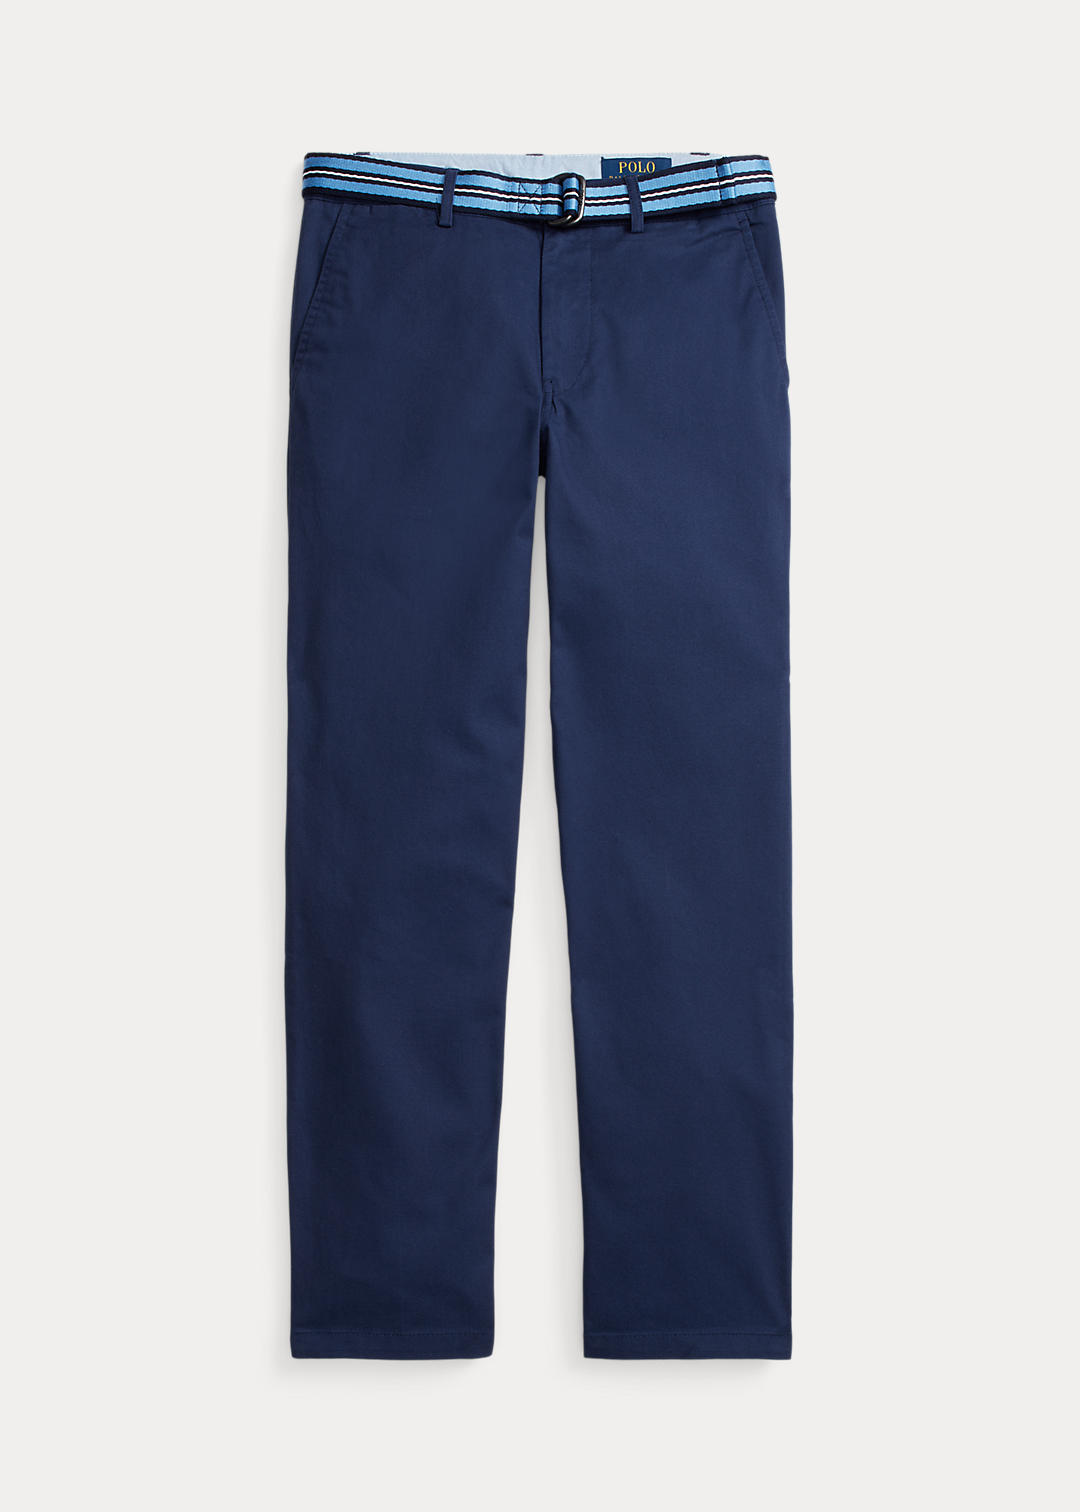 Boys 8-18 Belted Slim Fit Stretch Twill Trouser 1